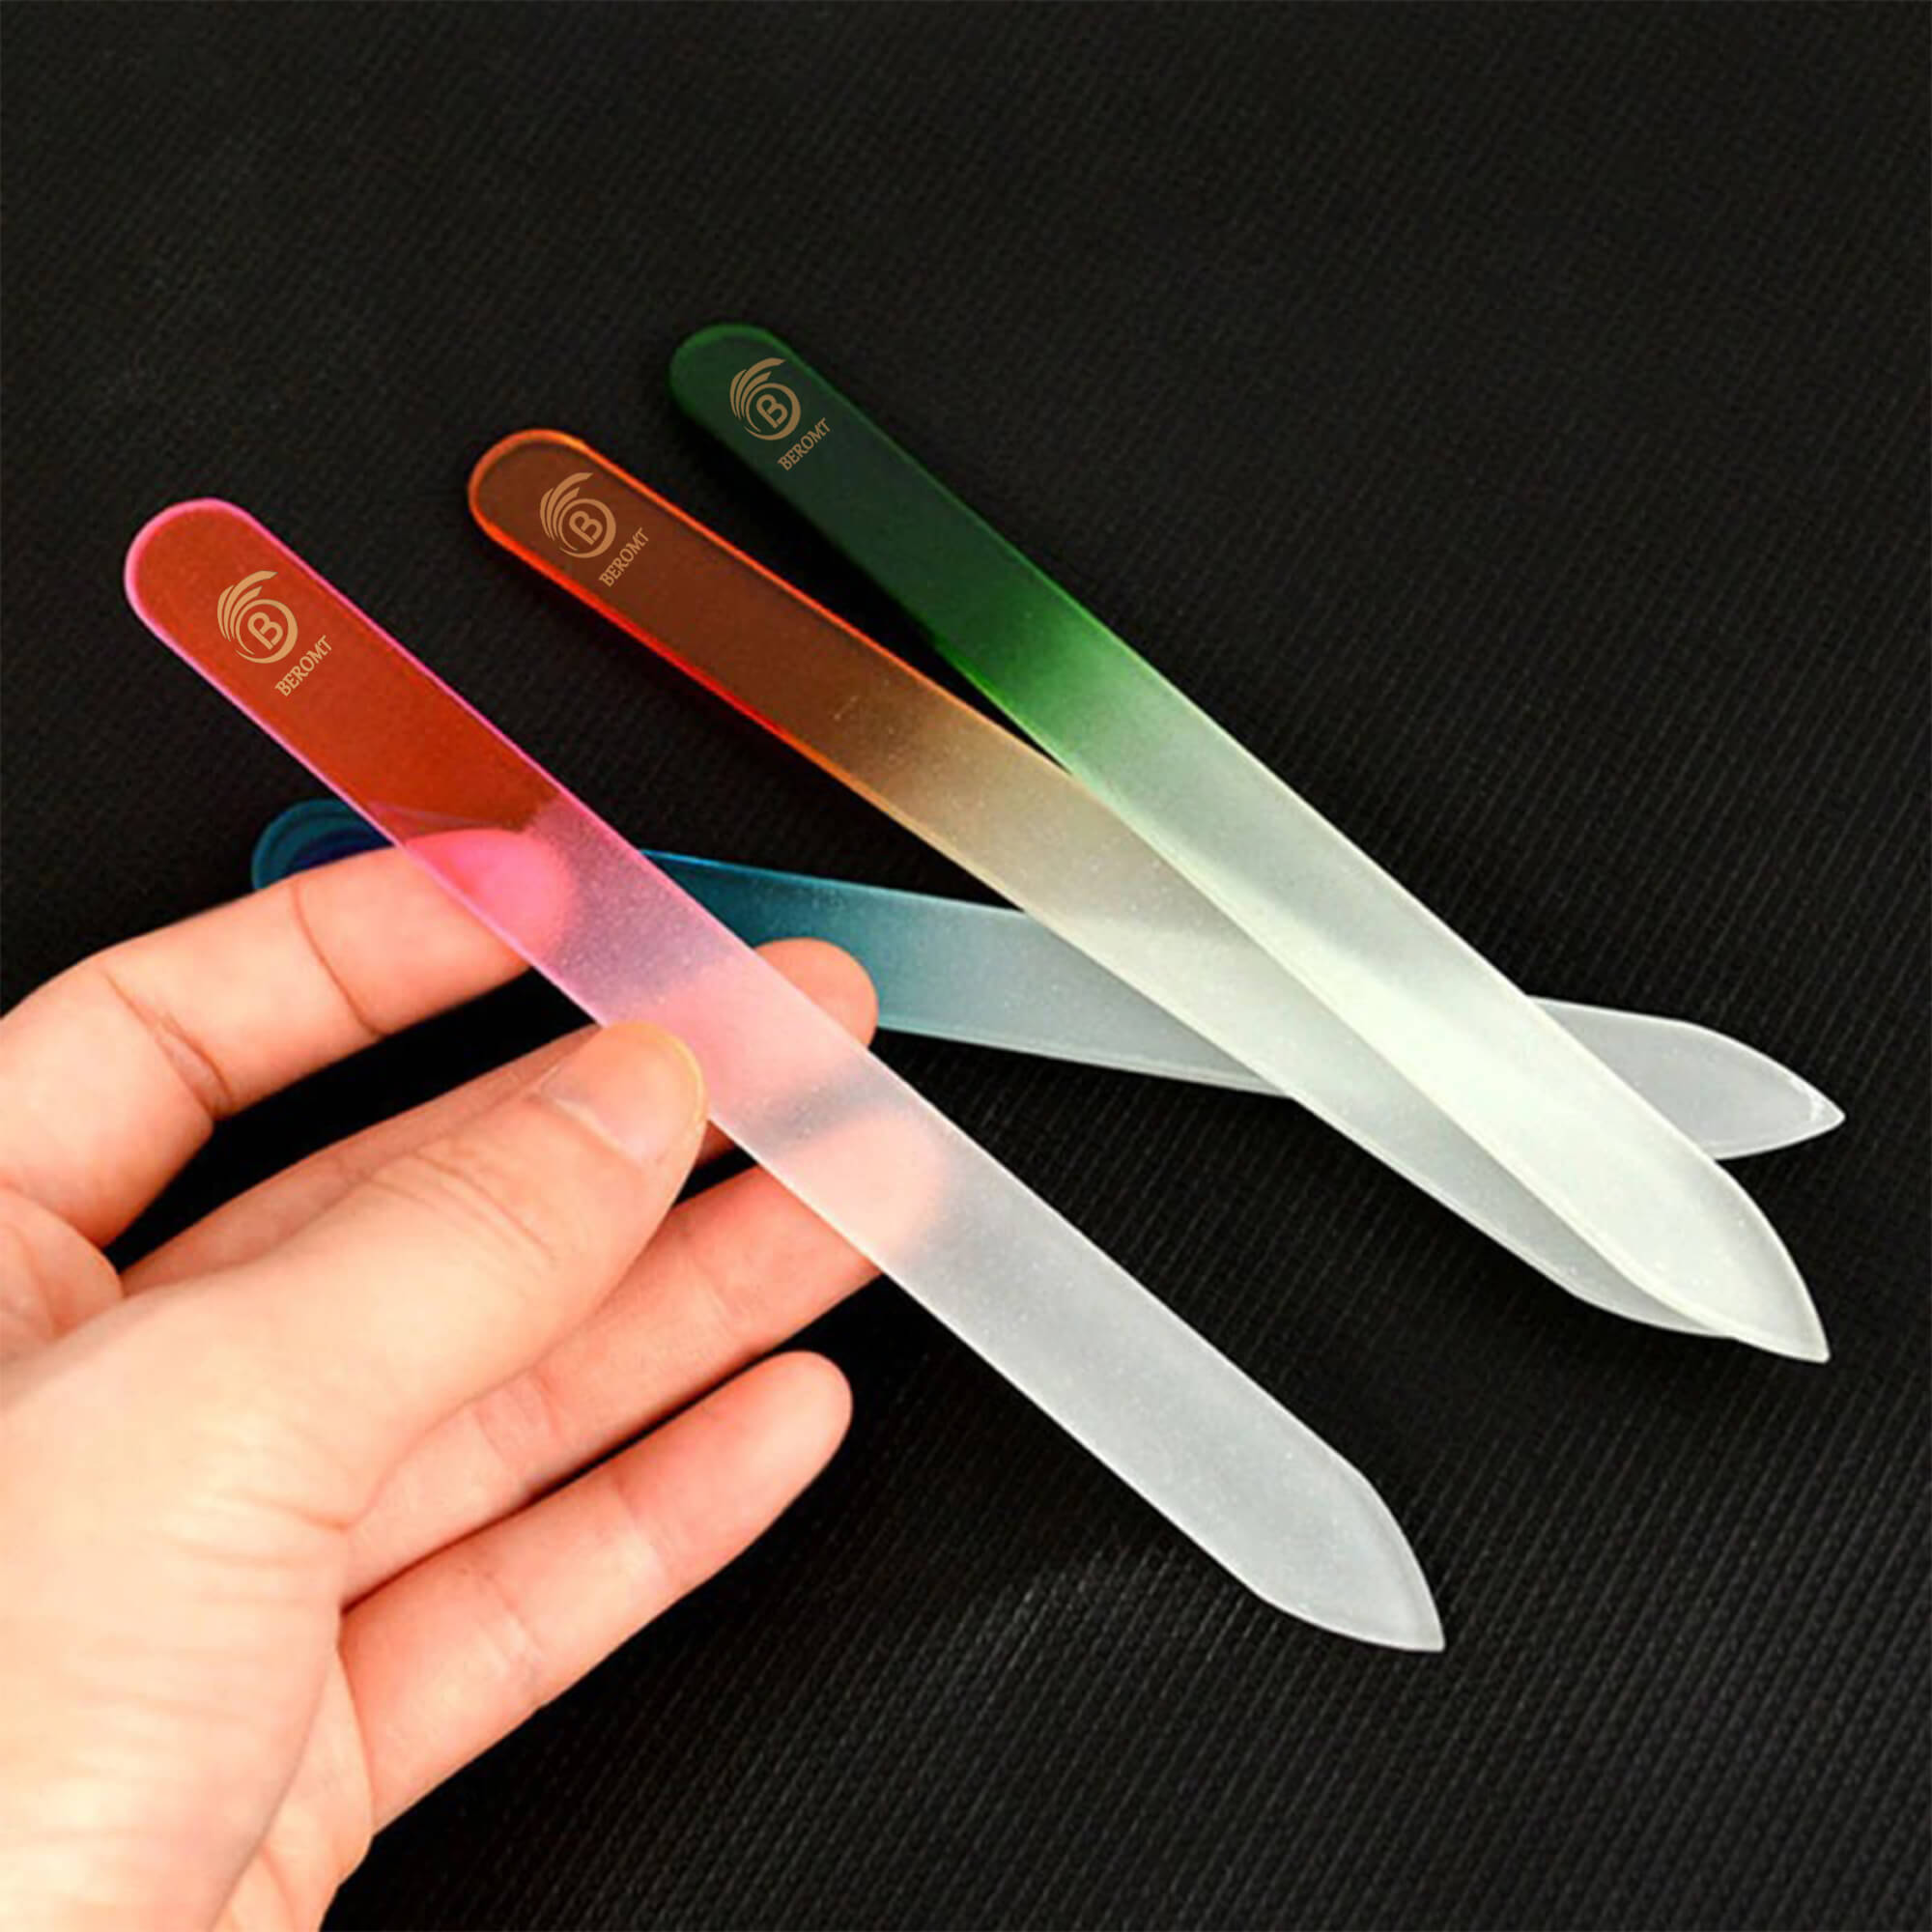 Crystal Glass Nail Files | Bridges For Peace in Canada